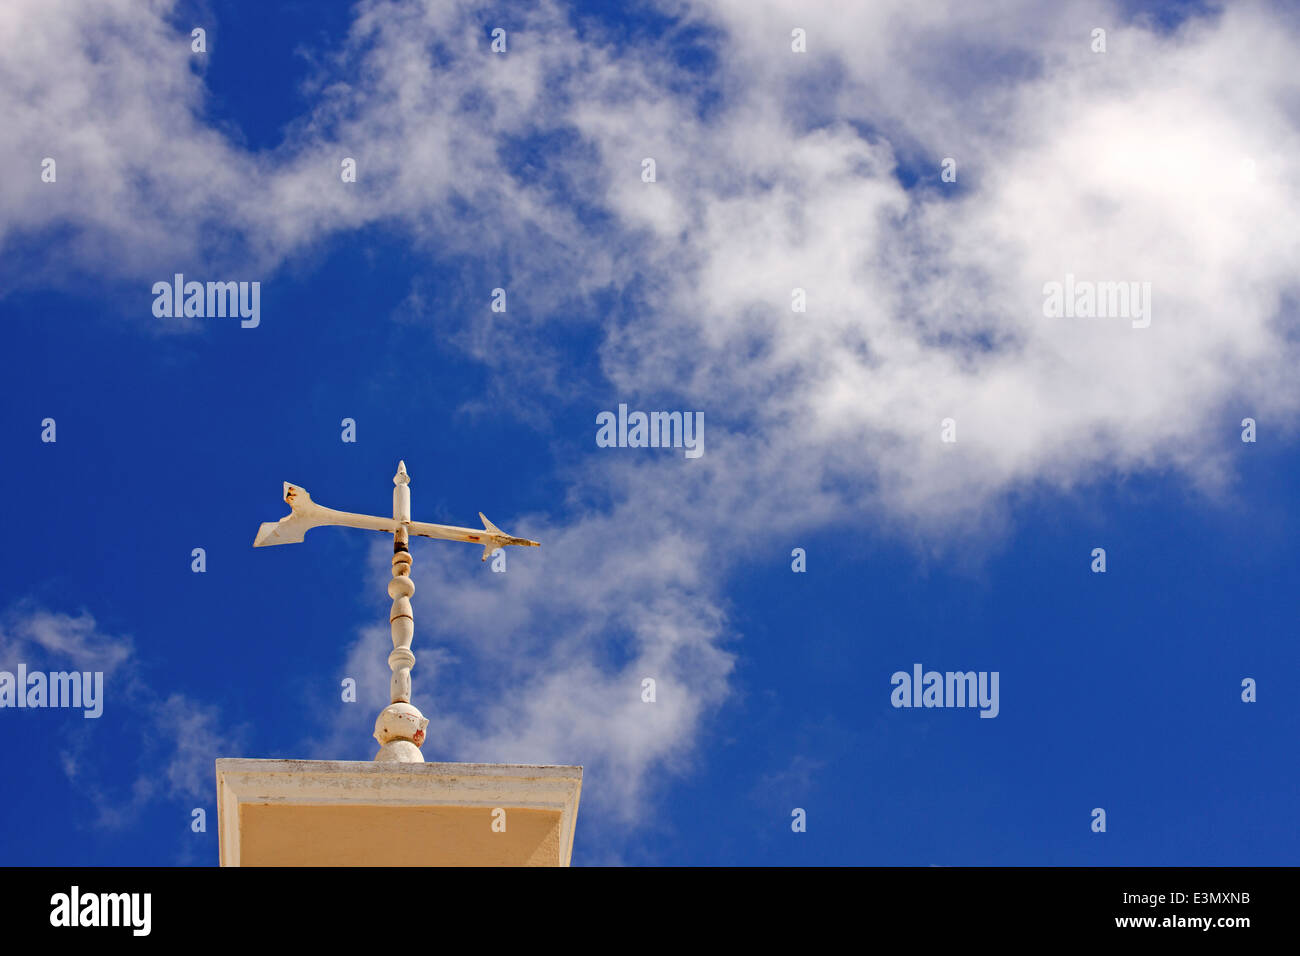 An arrow points to the east with blue sky background Stock Photo